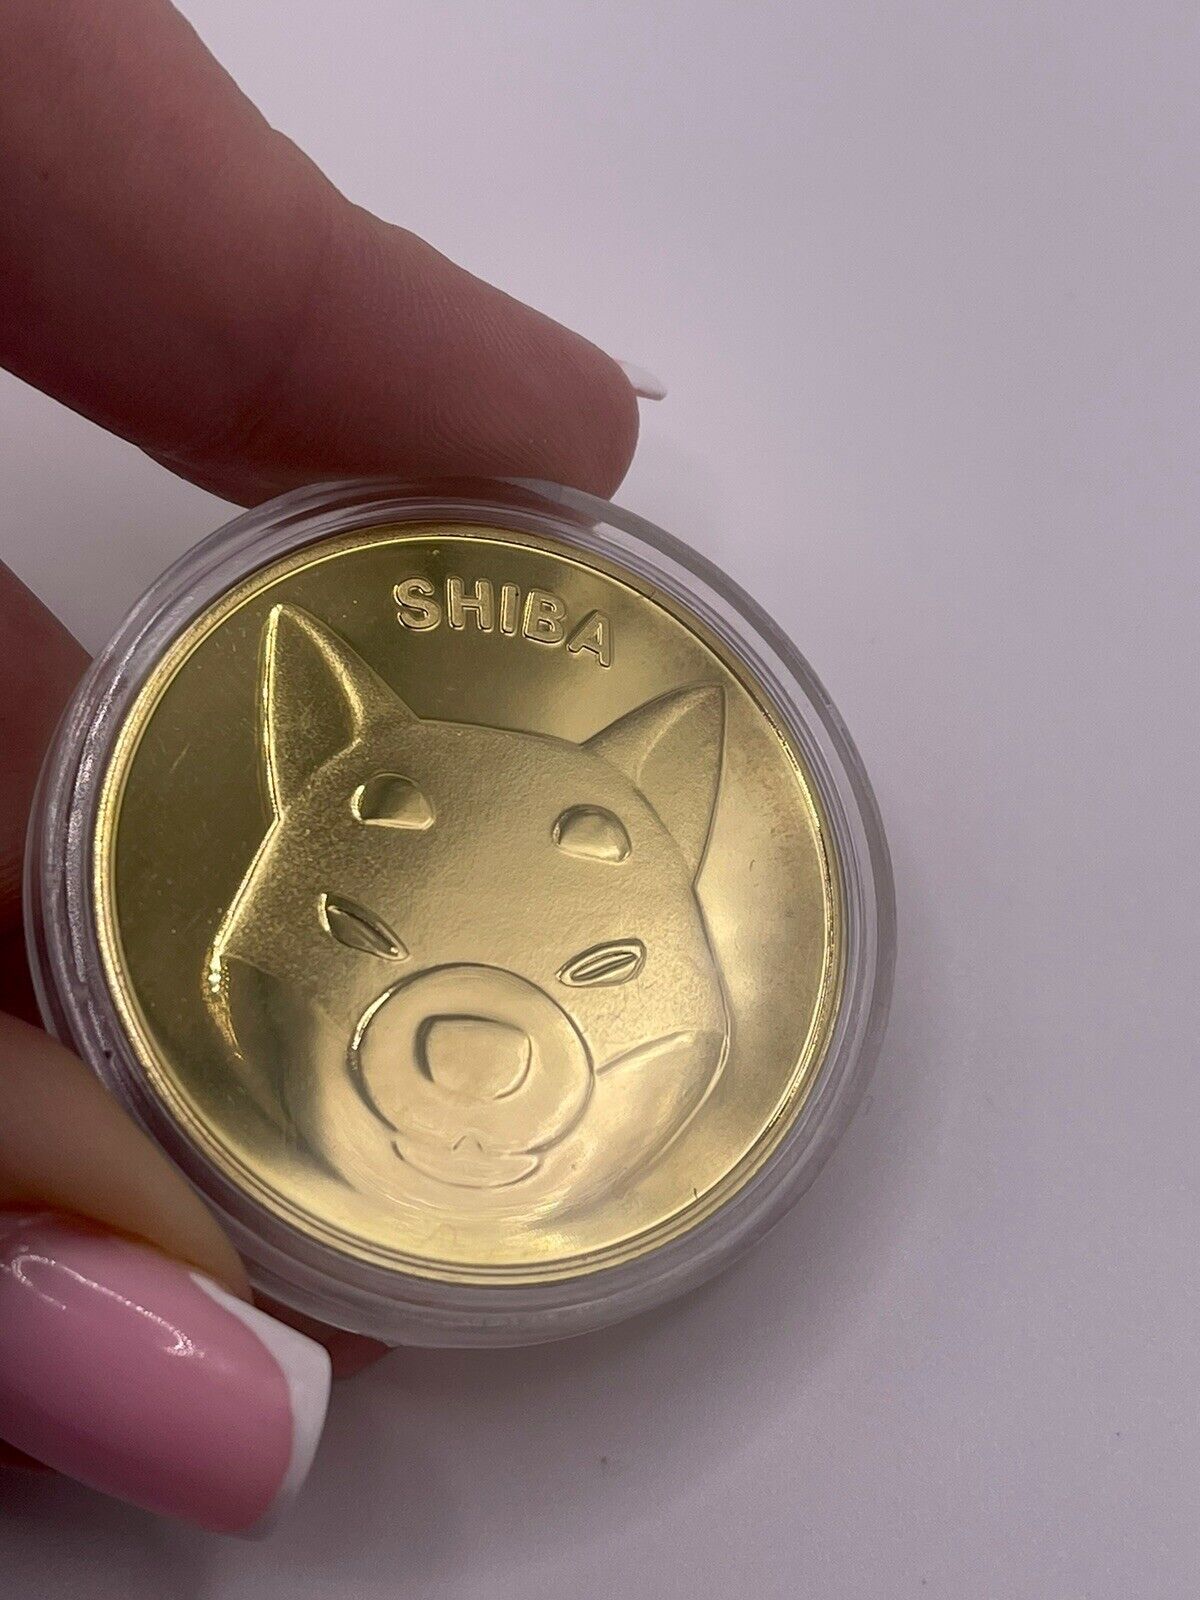 Shiba Inu Coin In Plastic Collector’s Case Limited Edition For Crypto Fans 1 Pcs